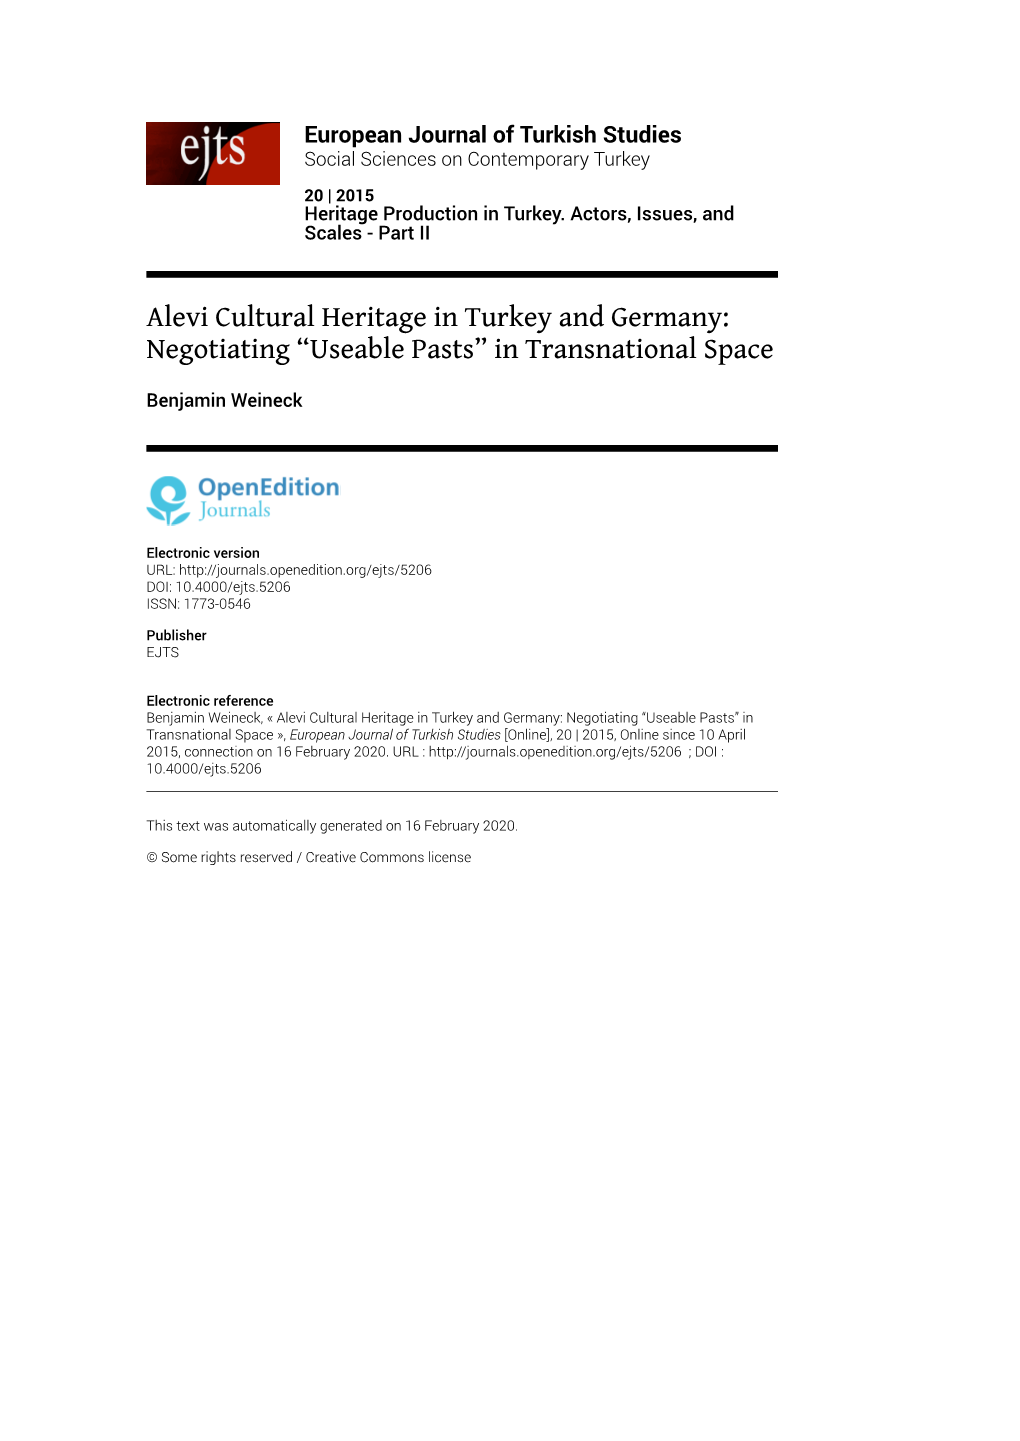 European Journal of Turkish Studies, 20 | 2015 Alevi Cultural Heritage in Turkey and Germany: Negotiating “Useable Pasts” In